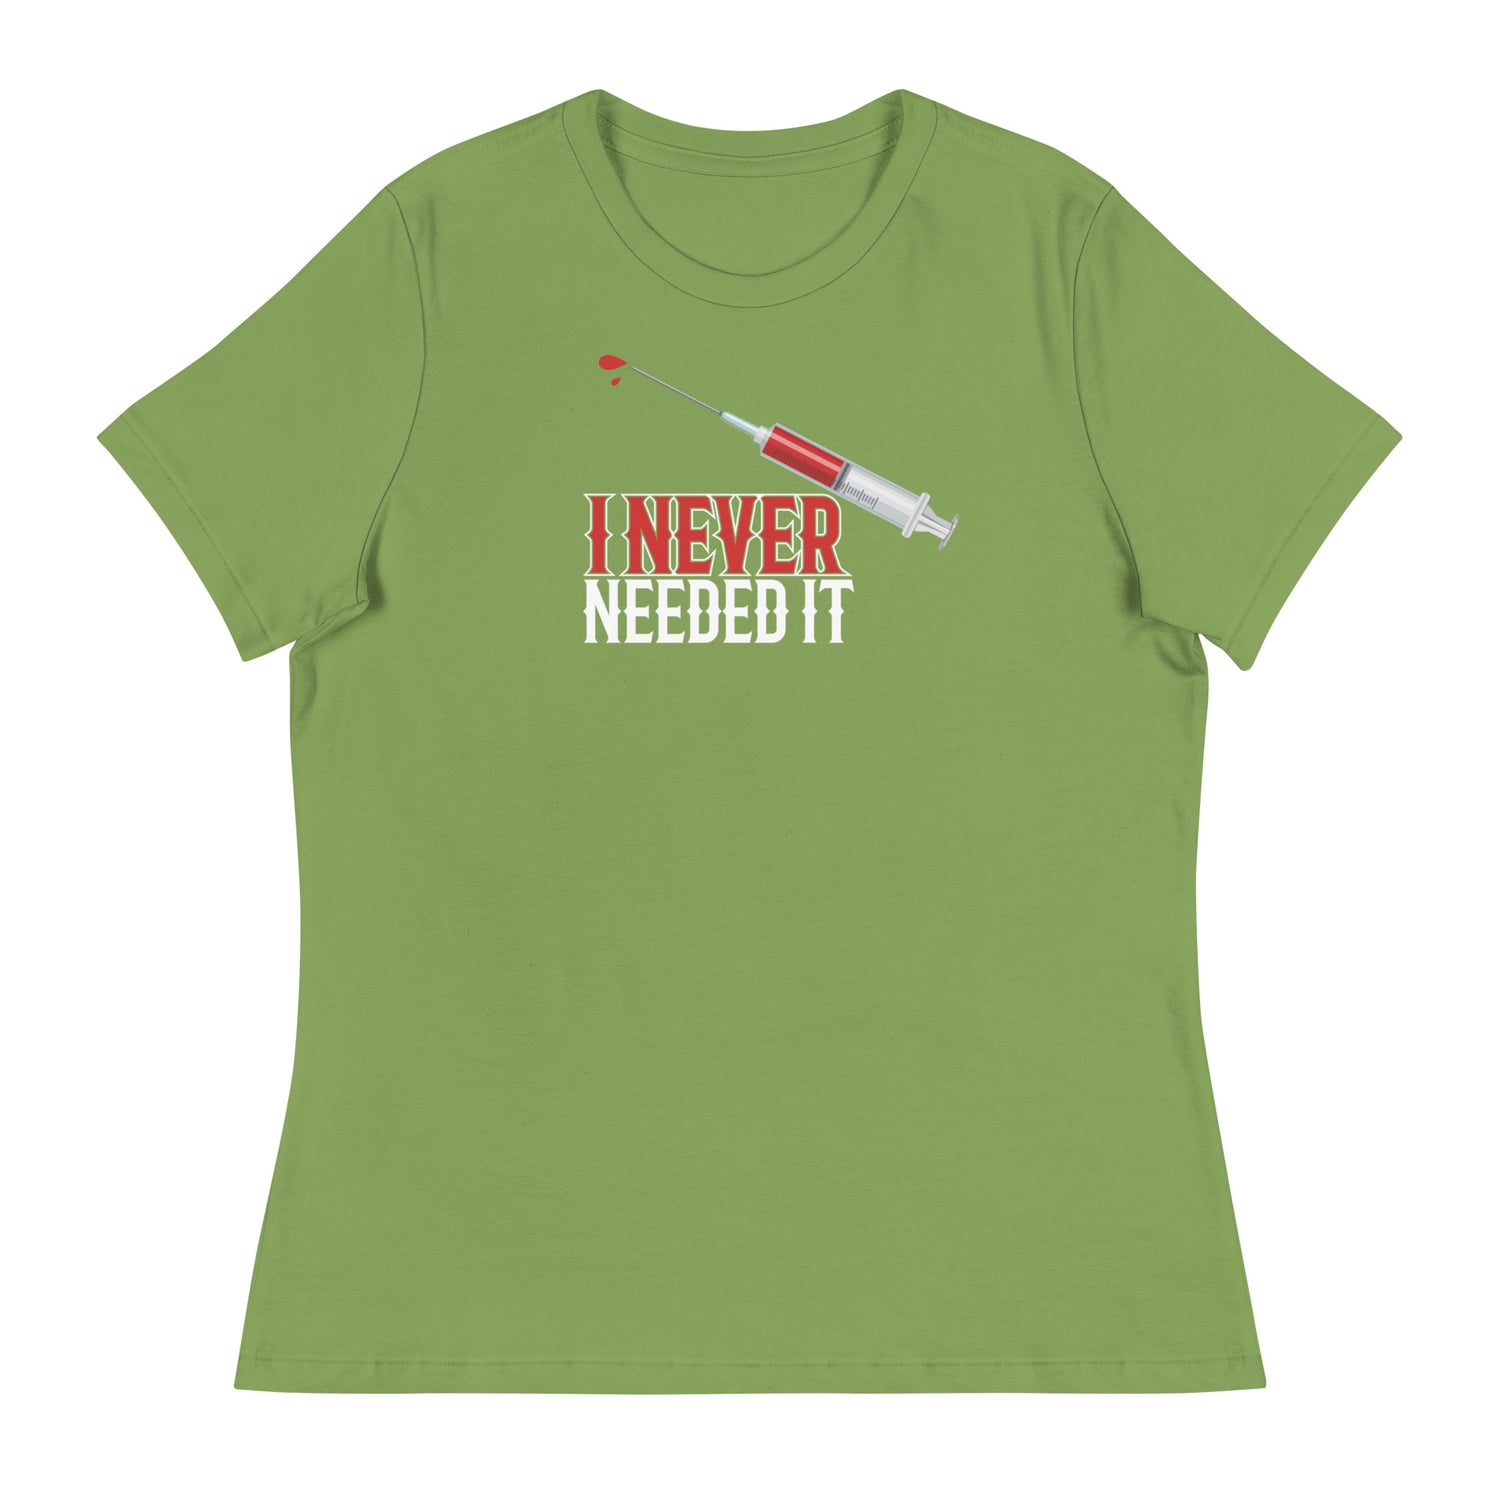 I NEVER NEEDED IT WOMENS FRONT AND BACK T-SHIRT